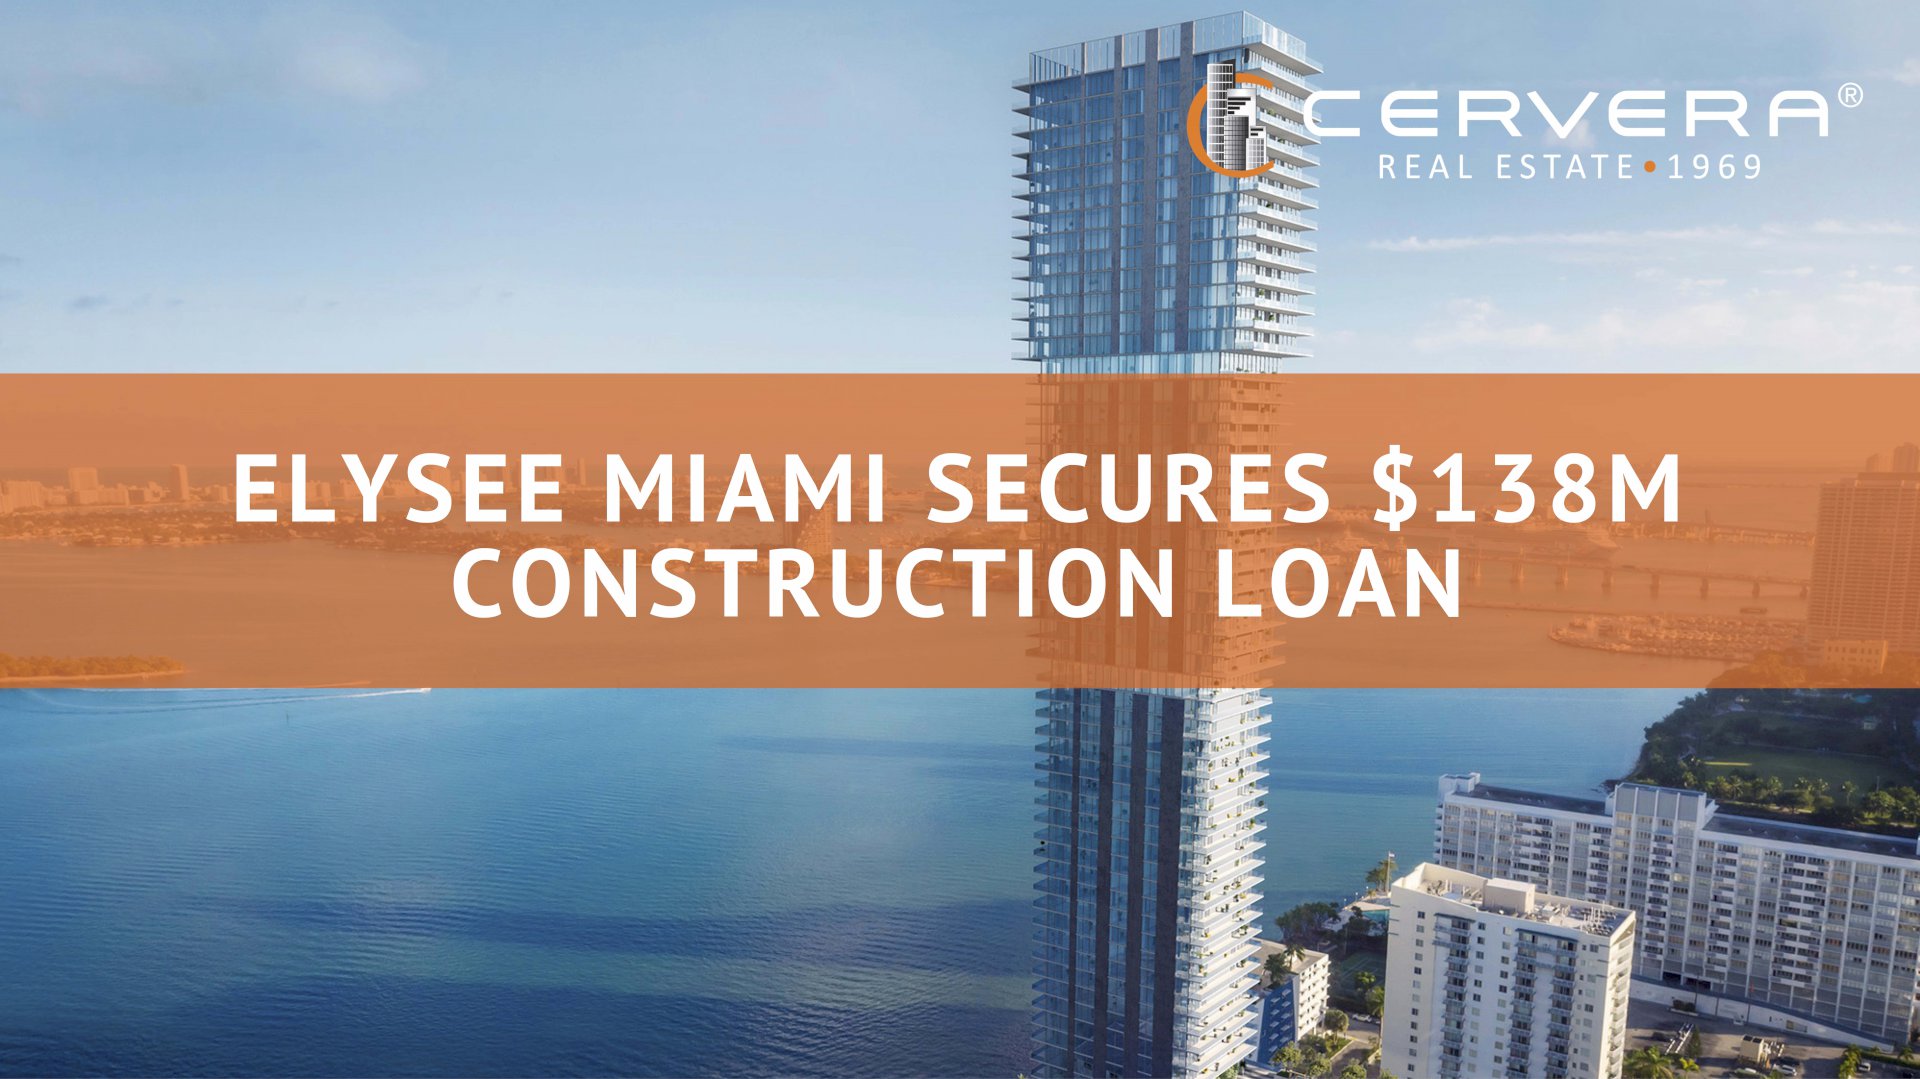 Elysee Miami closes on $138M construction loan